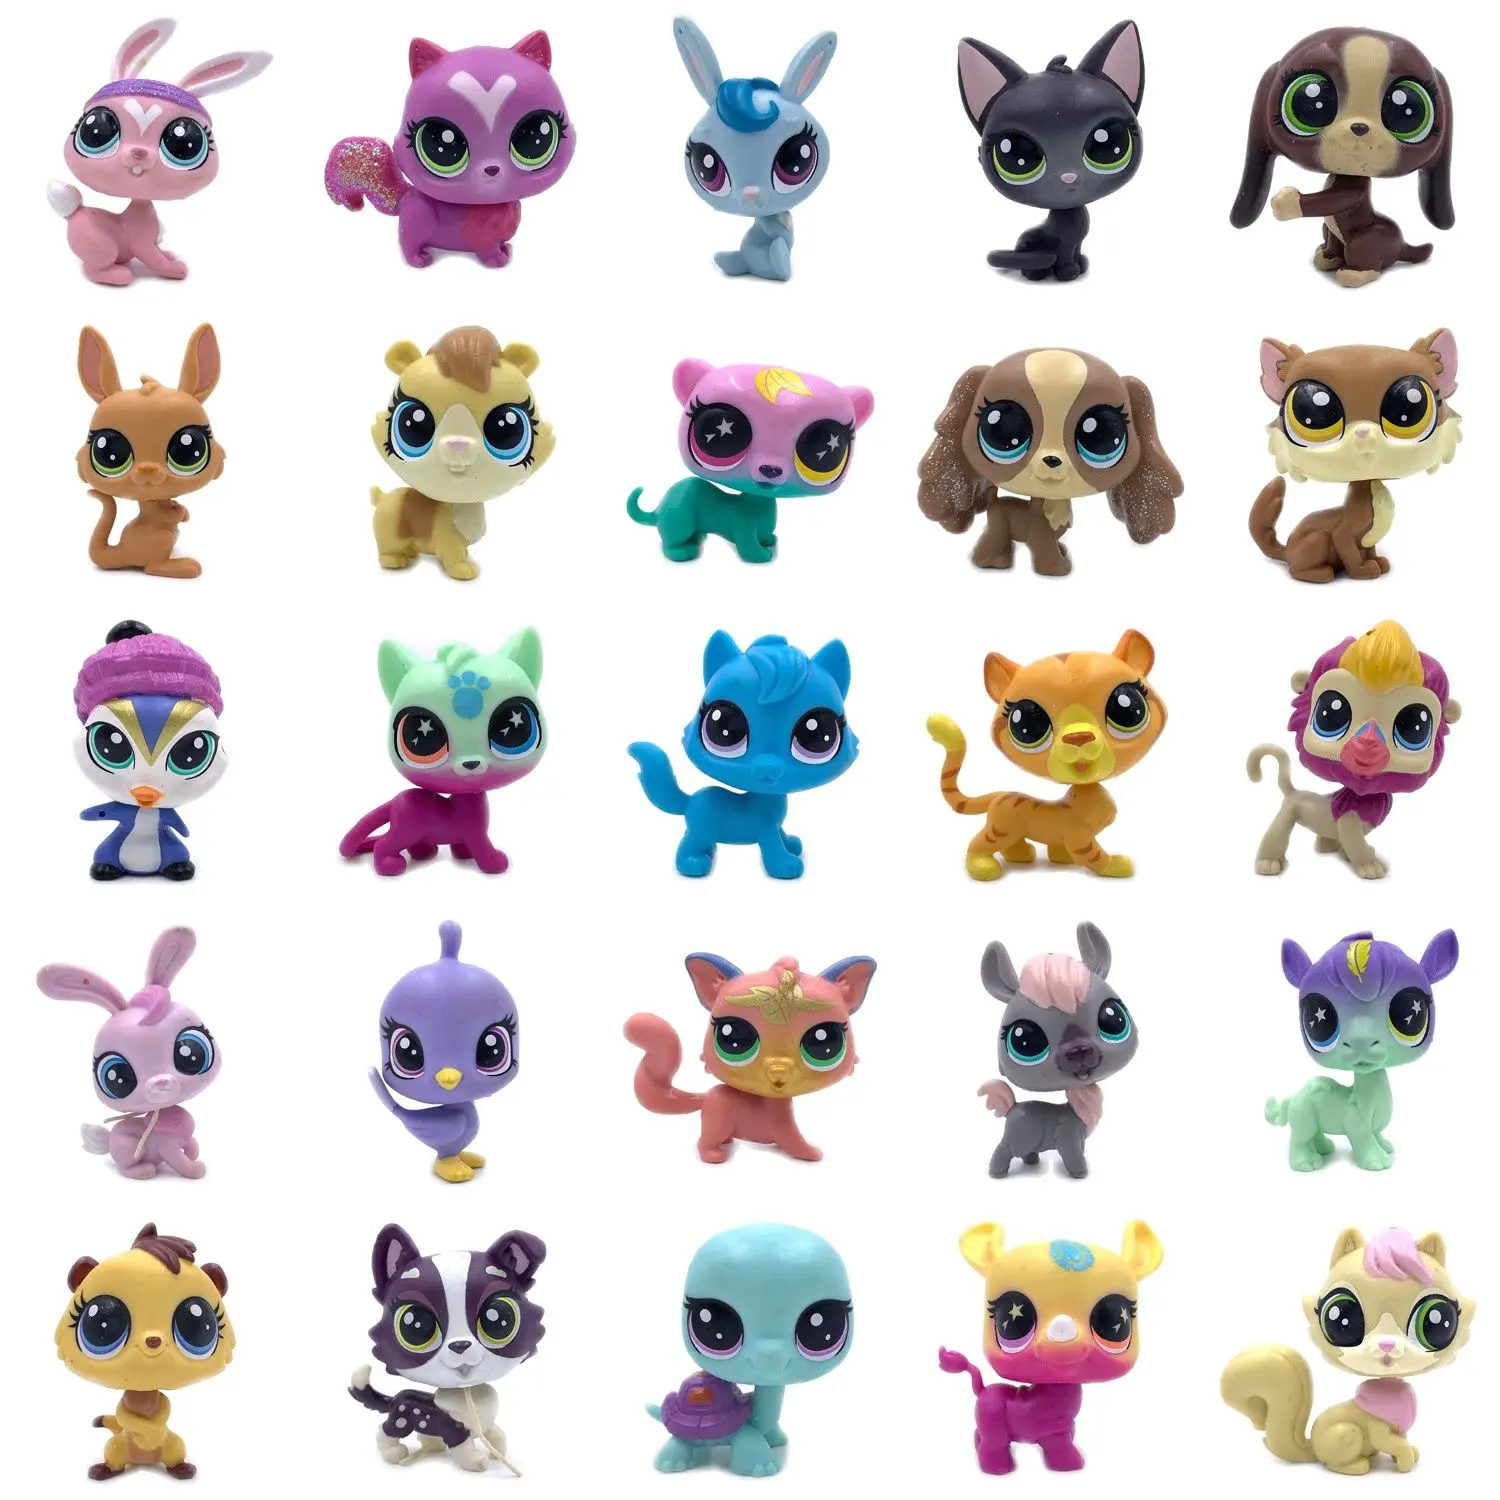 LPS CAT Buy 5 Get 2 4-5 cm Littlest pet shop toys original kitty puppy Old cute animal Bobble head toy for girls Christmas gift